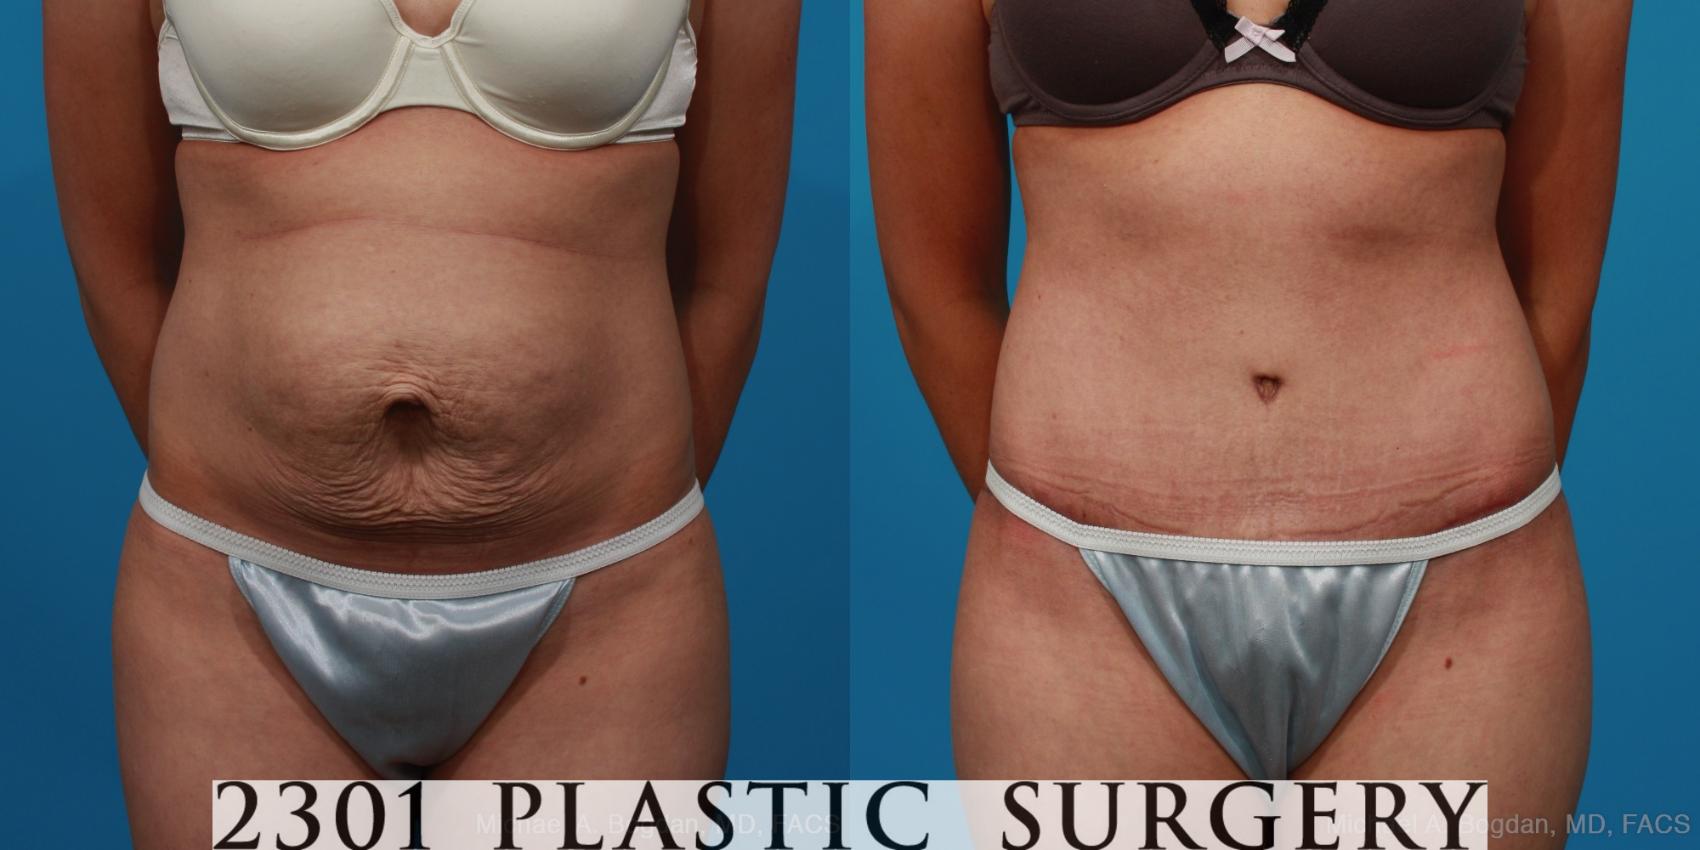 Fort Worth - Tummy Tuck after Pregnancy